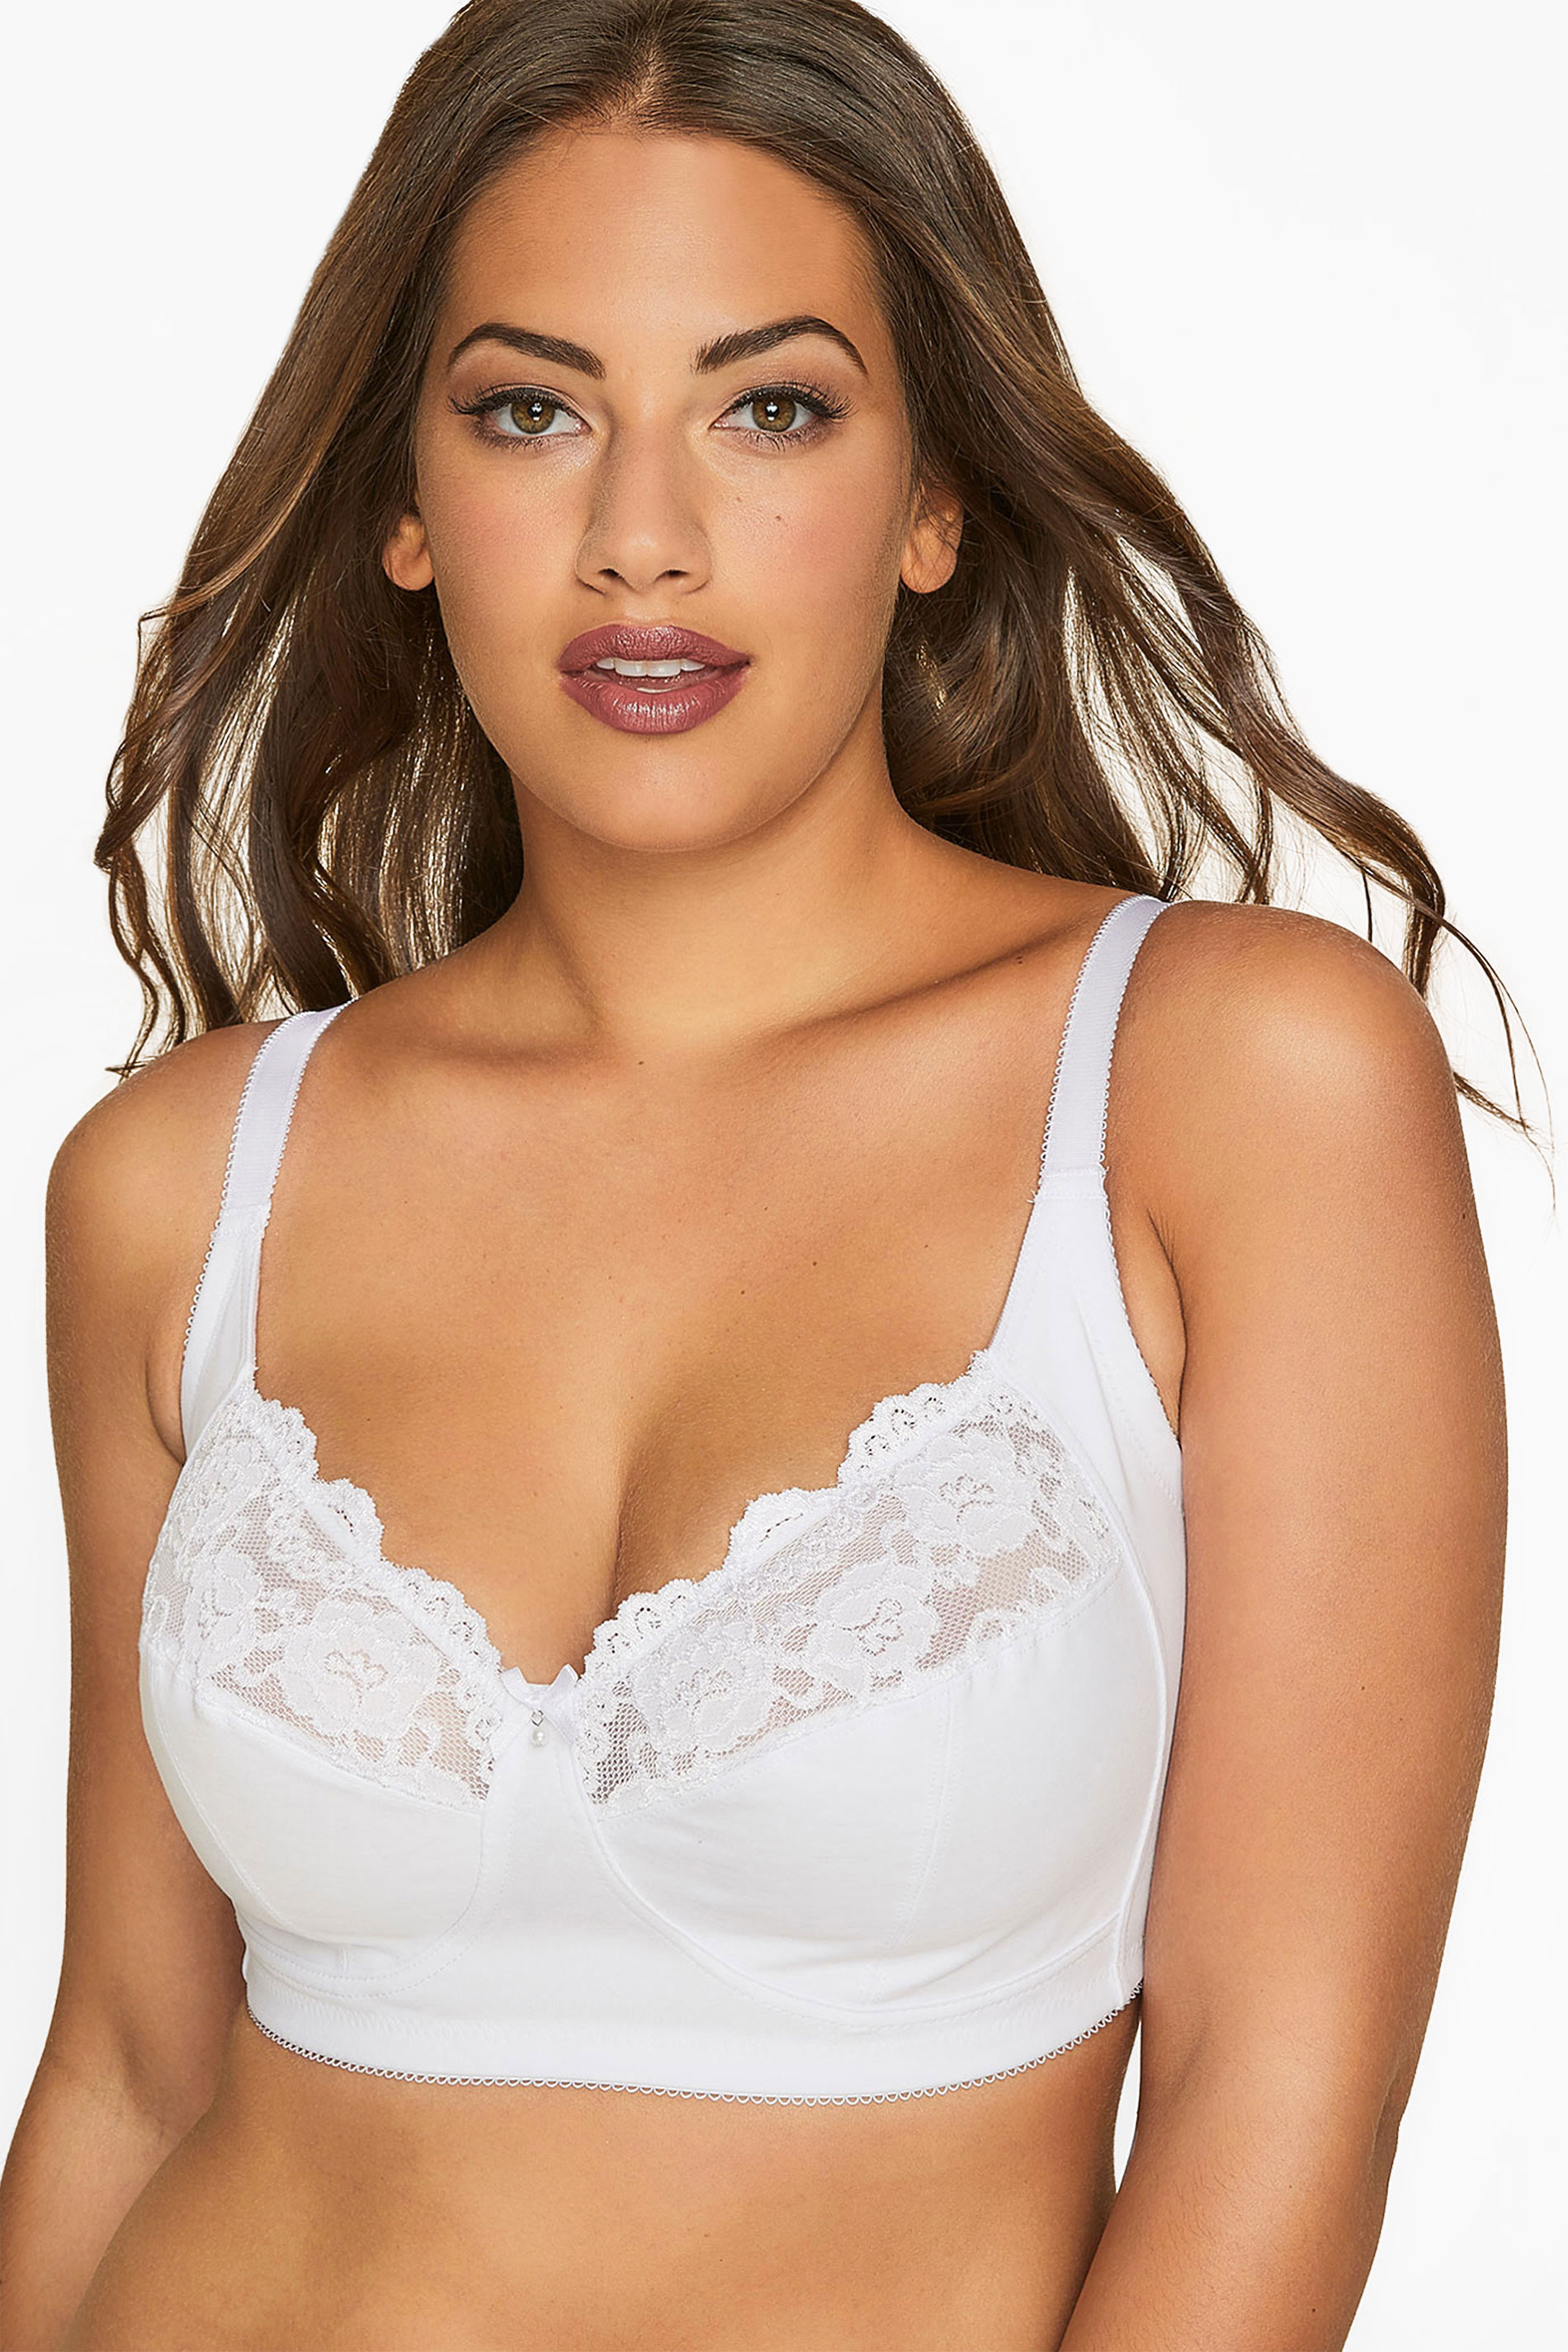 White Non-Wired Cotton Bra With Lace Trim - Best Seller 1